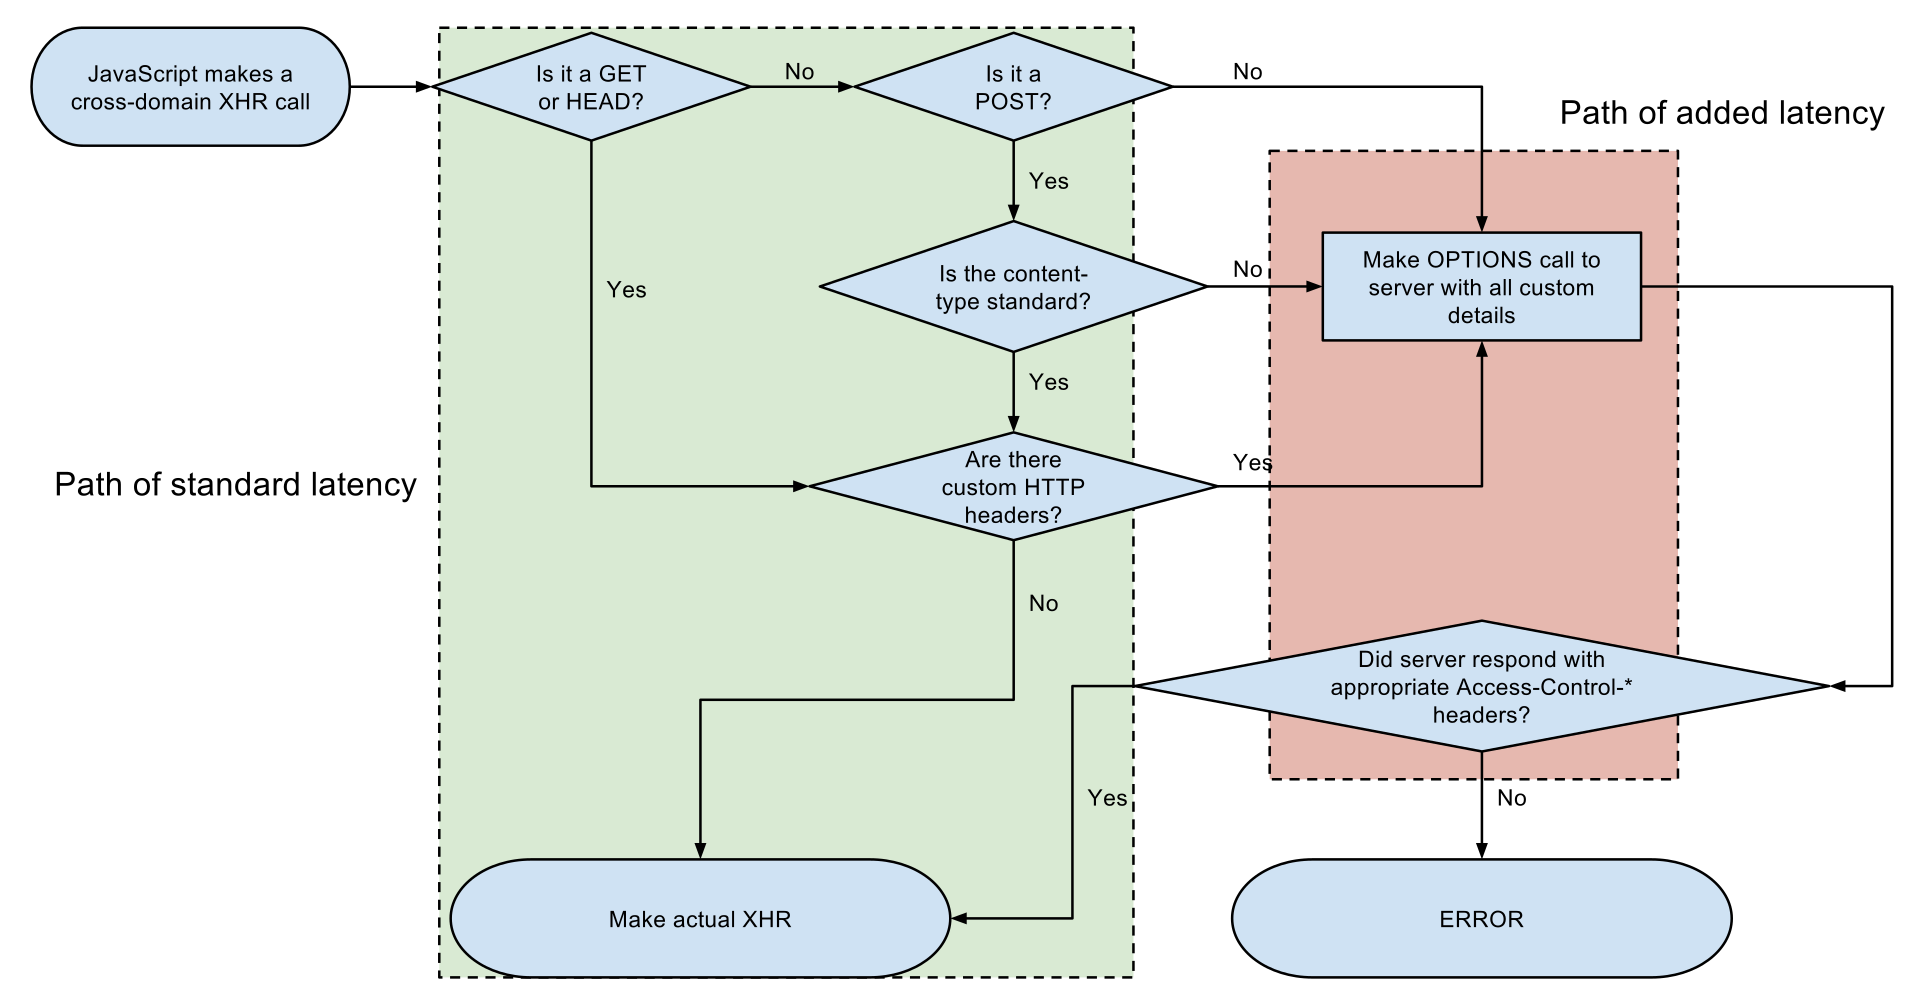 CORS request flow (credits to Wikimedia)